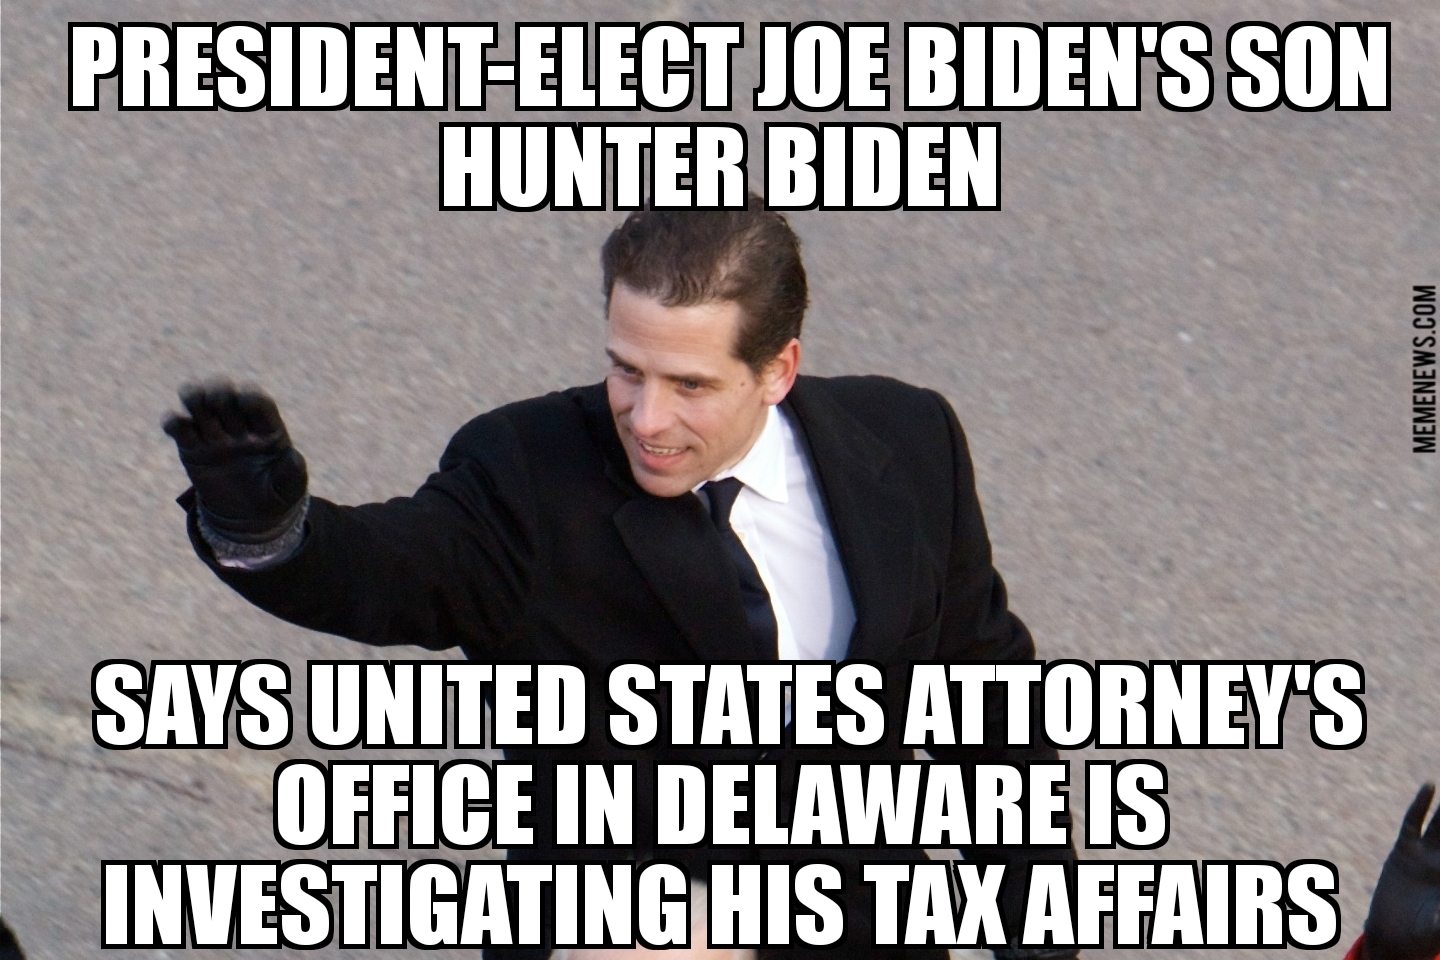 Hunter Biden’s taxes being investigated